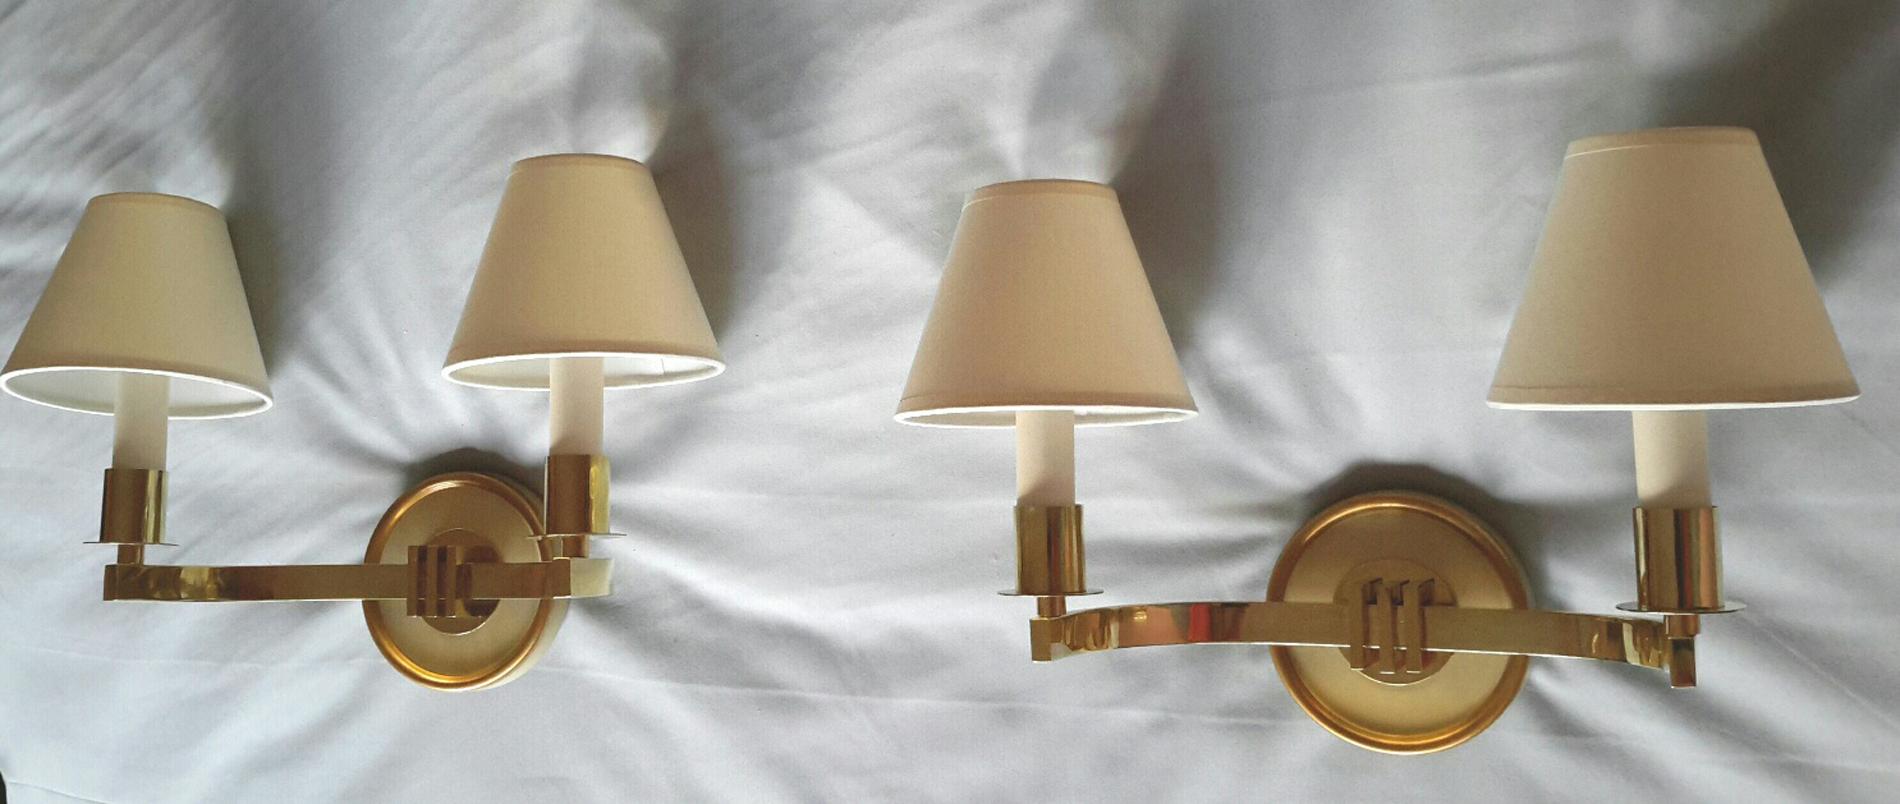 Gilt Chic Pair of Bronze French Mid-Century Modern Wall Sconces, 1950